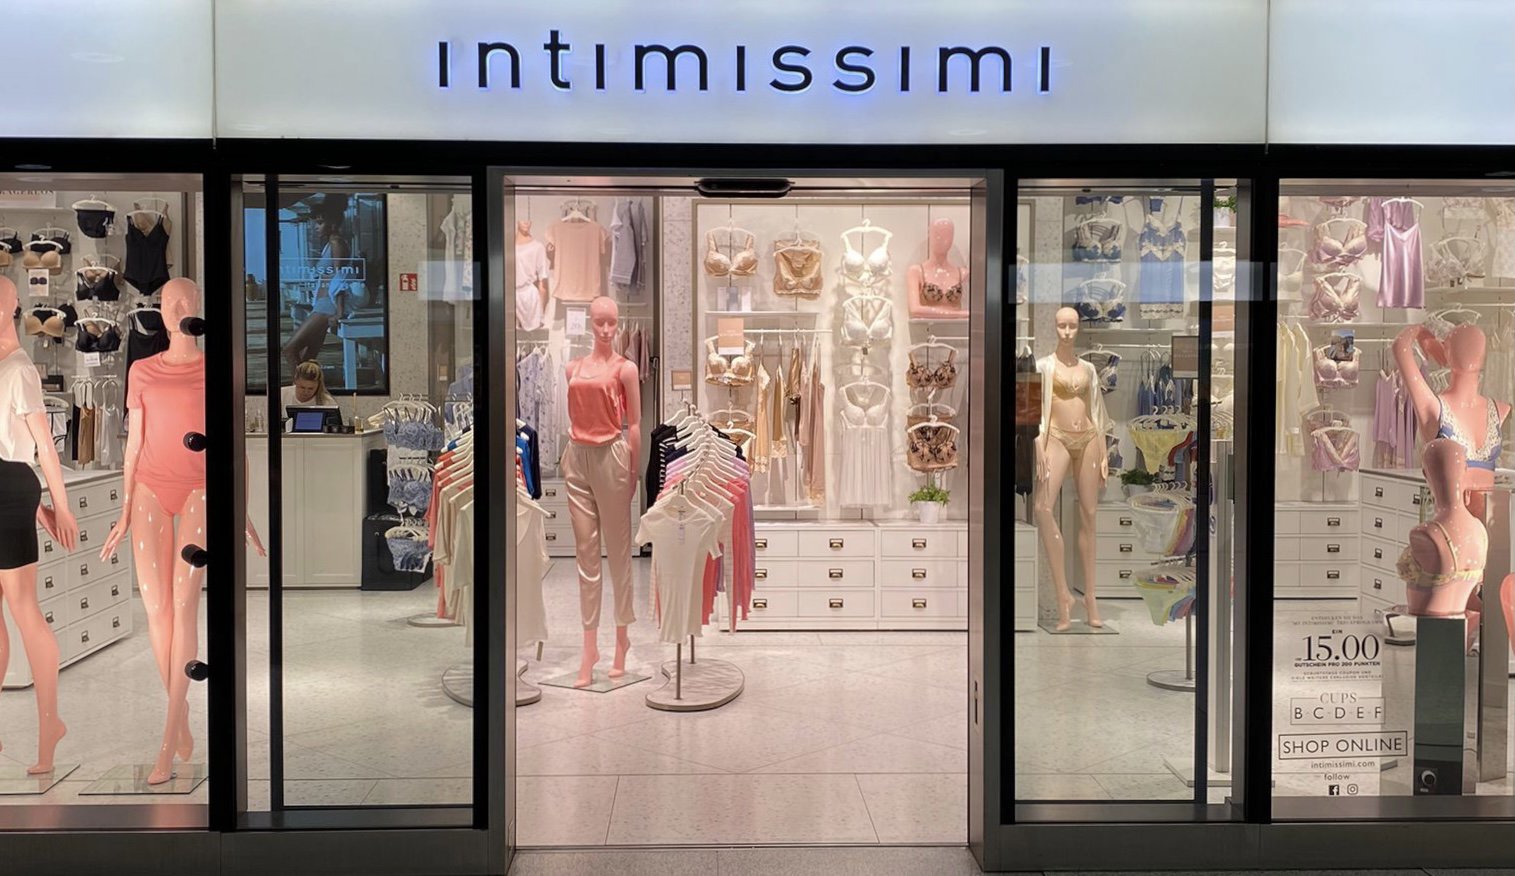 https://www.intimissimi.com/on/demandware.static/-/Library-Sites-IntimissimiContentLibrary/default/dwb21ae154/storeImages/INT_IR42_001.jpg